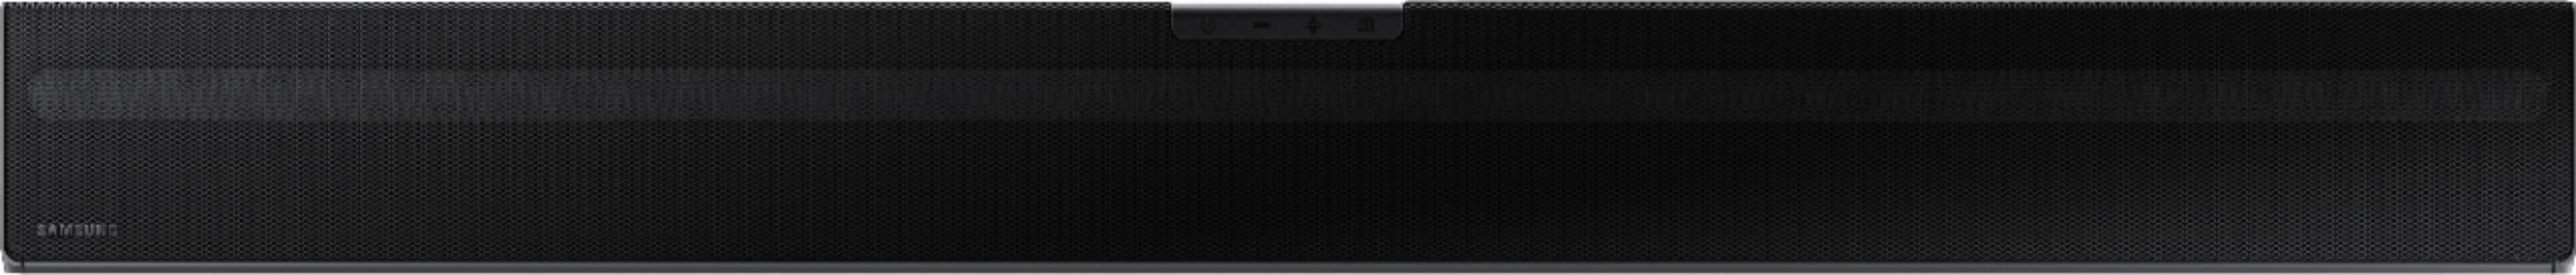 Left View: Samsung - 5.1-Channel Soundbar with Wireless Subwoofer and Acoustic Beam - Black